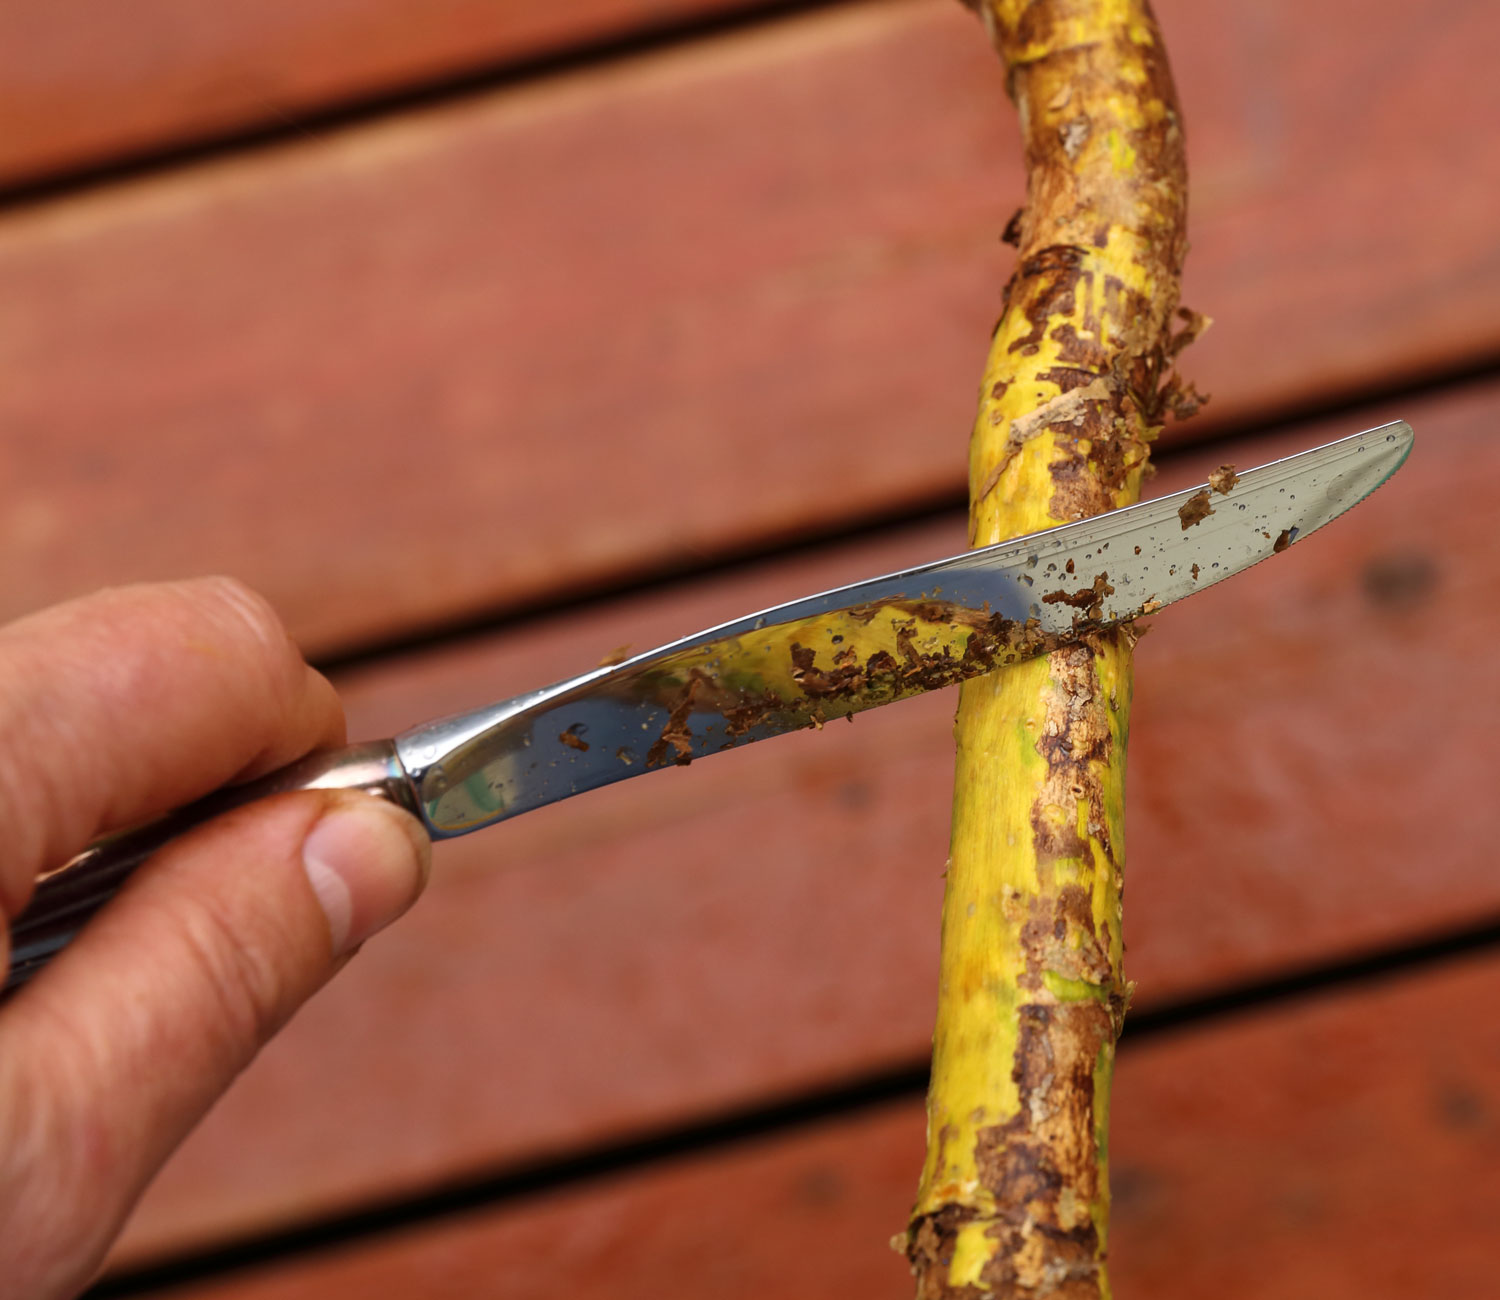 A knife can also be used to scrape the outer bark off.